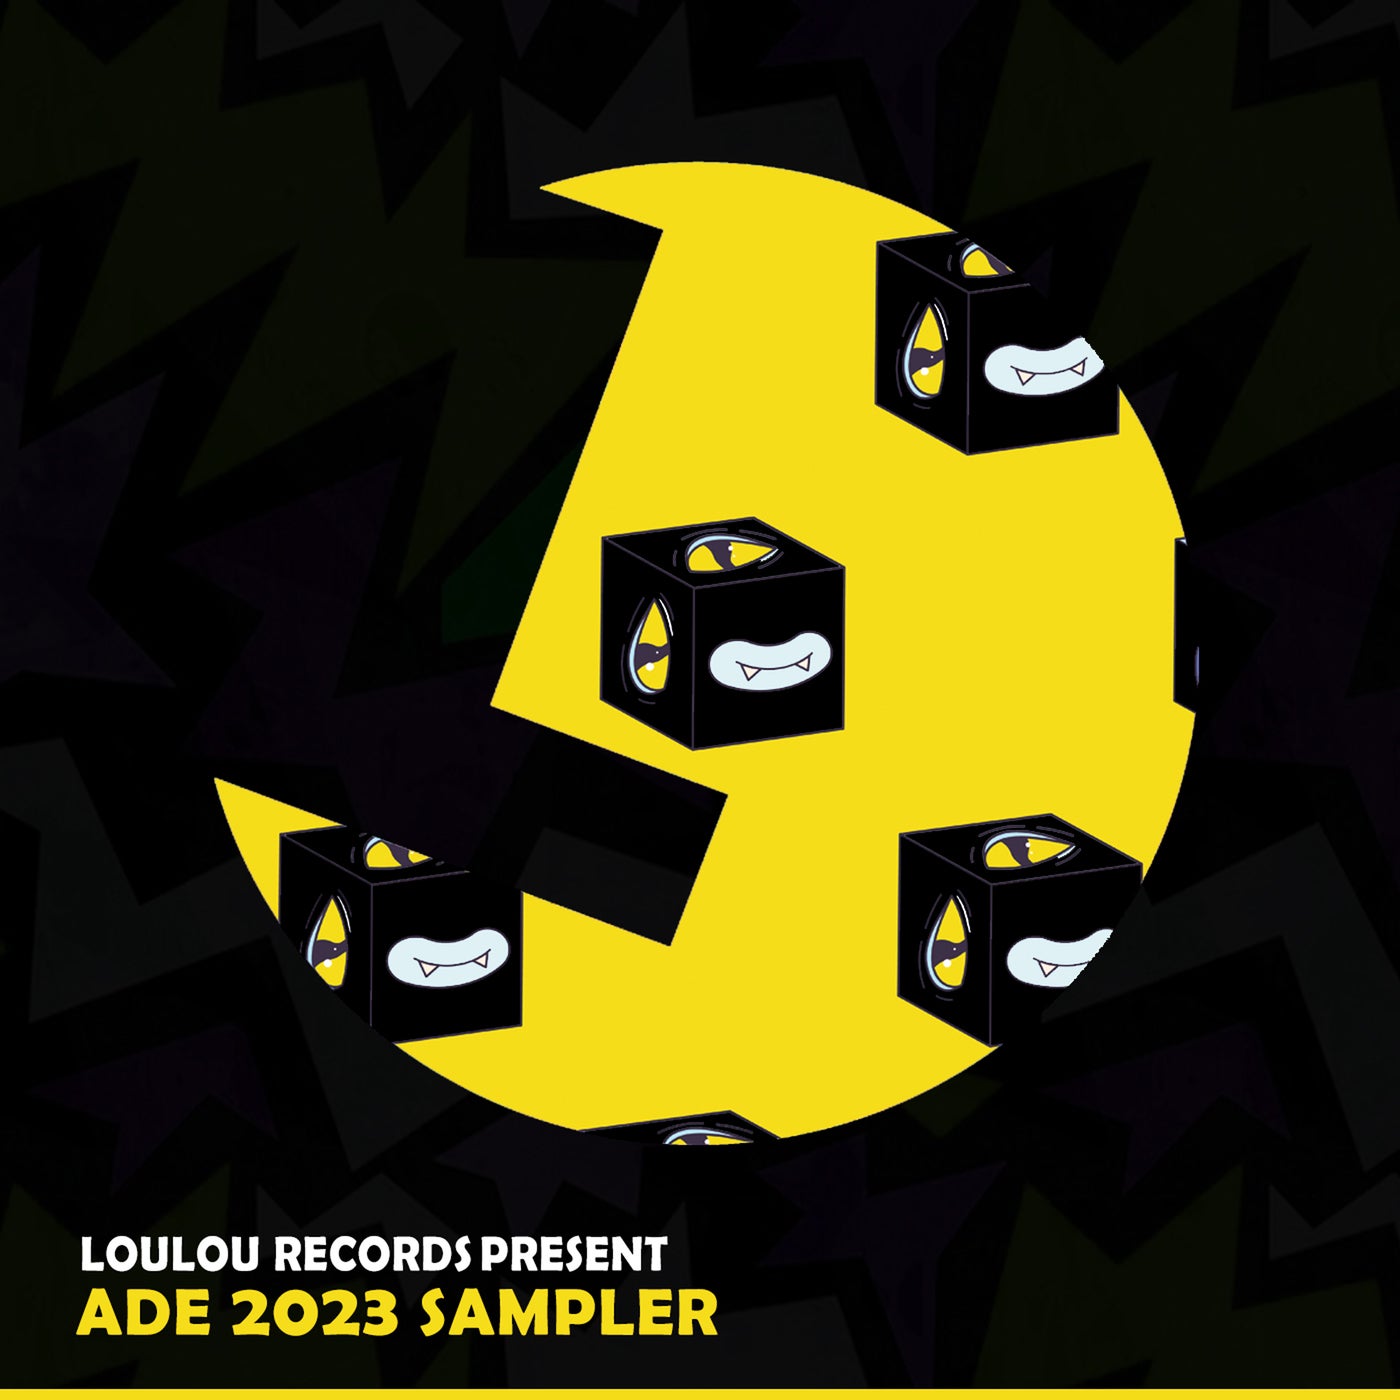 Loulou records ADE 2023 Sampler